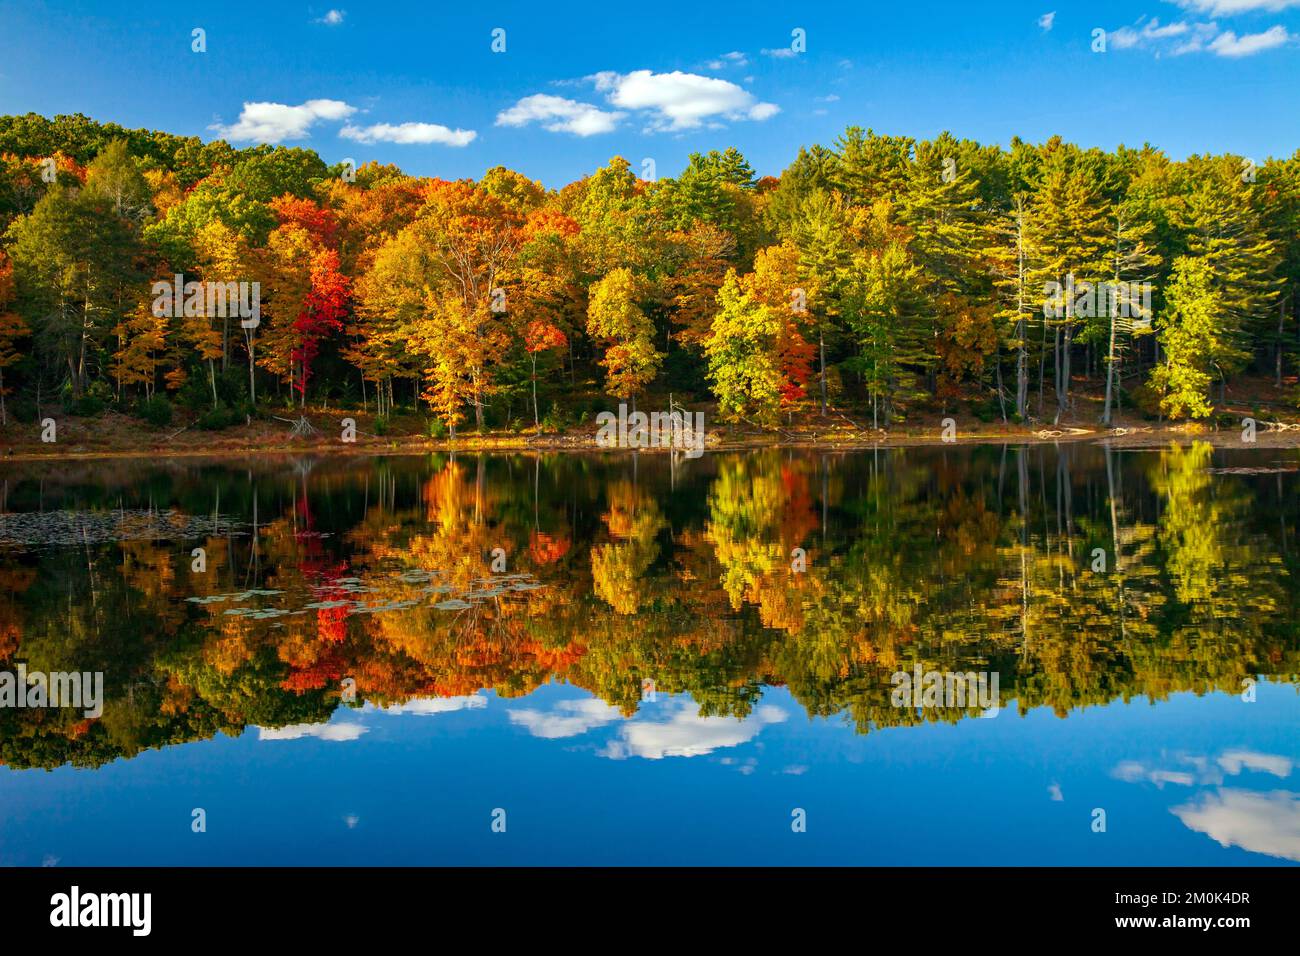 Egypt Mills Pond in Delsaware WAter Gap Nationsal Recreation Area, Pennsylvania is  popular area for wildlife and listed as an inportant bird area. Stock Photo